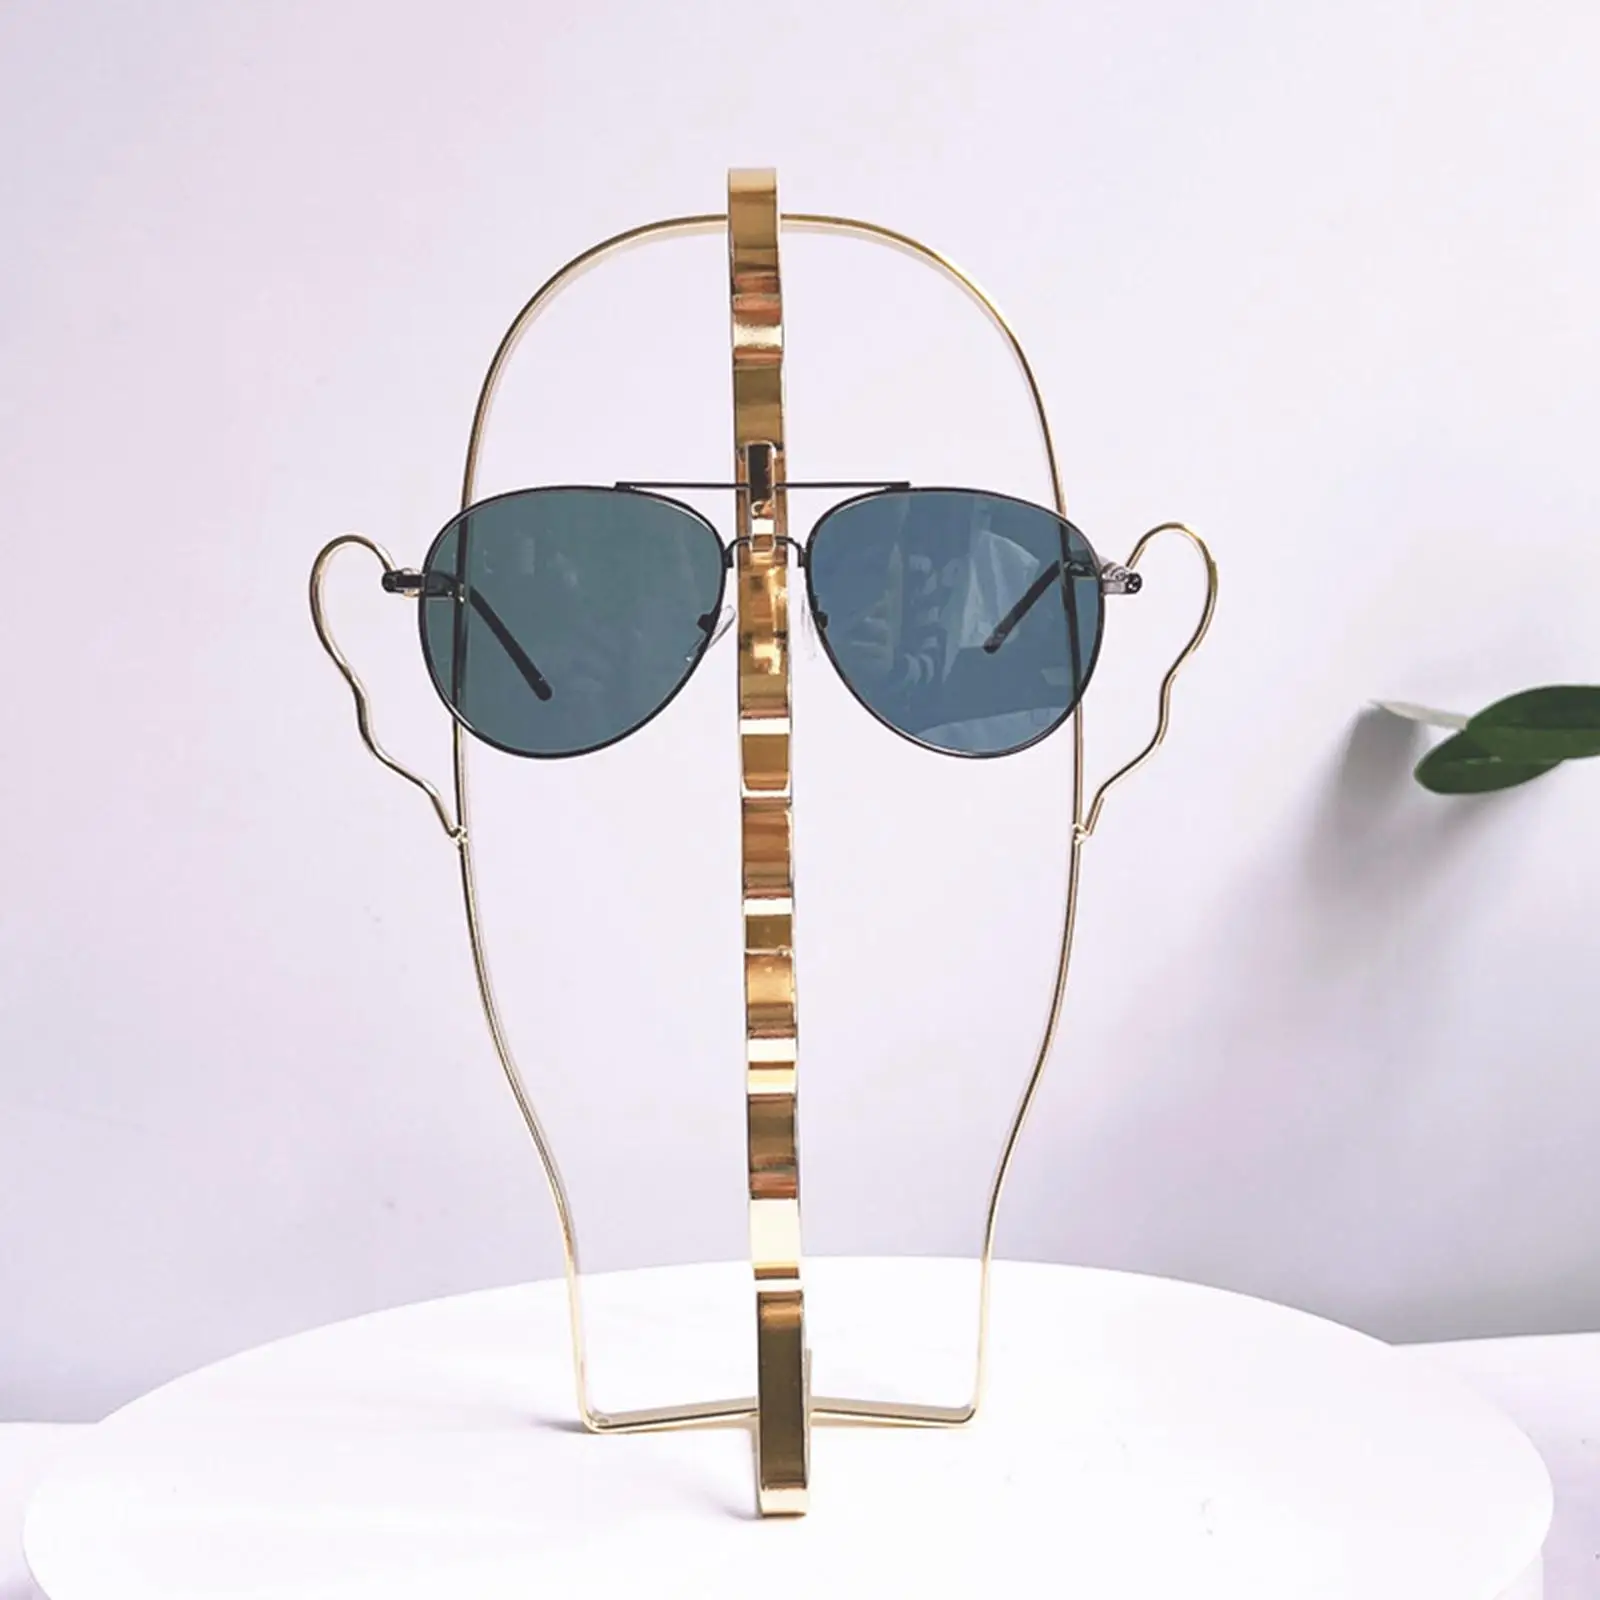 Sunglasses Display Stand Glasses Storage Organizer Character Modeling Iron Glasses Storage Rack for Stores Dressing Room Desk